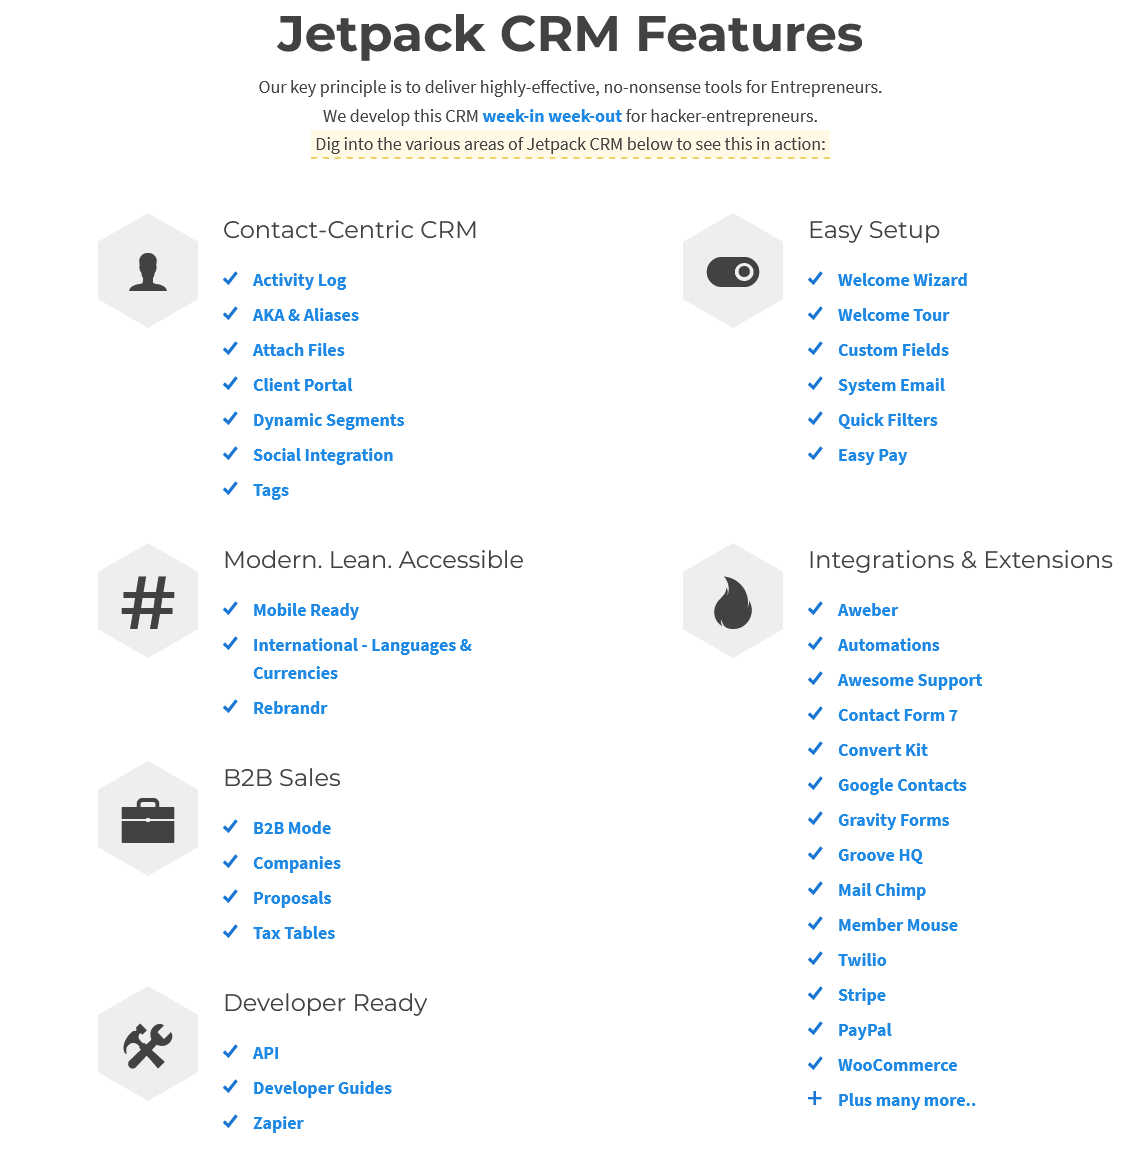 Jetpack CRM Features